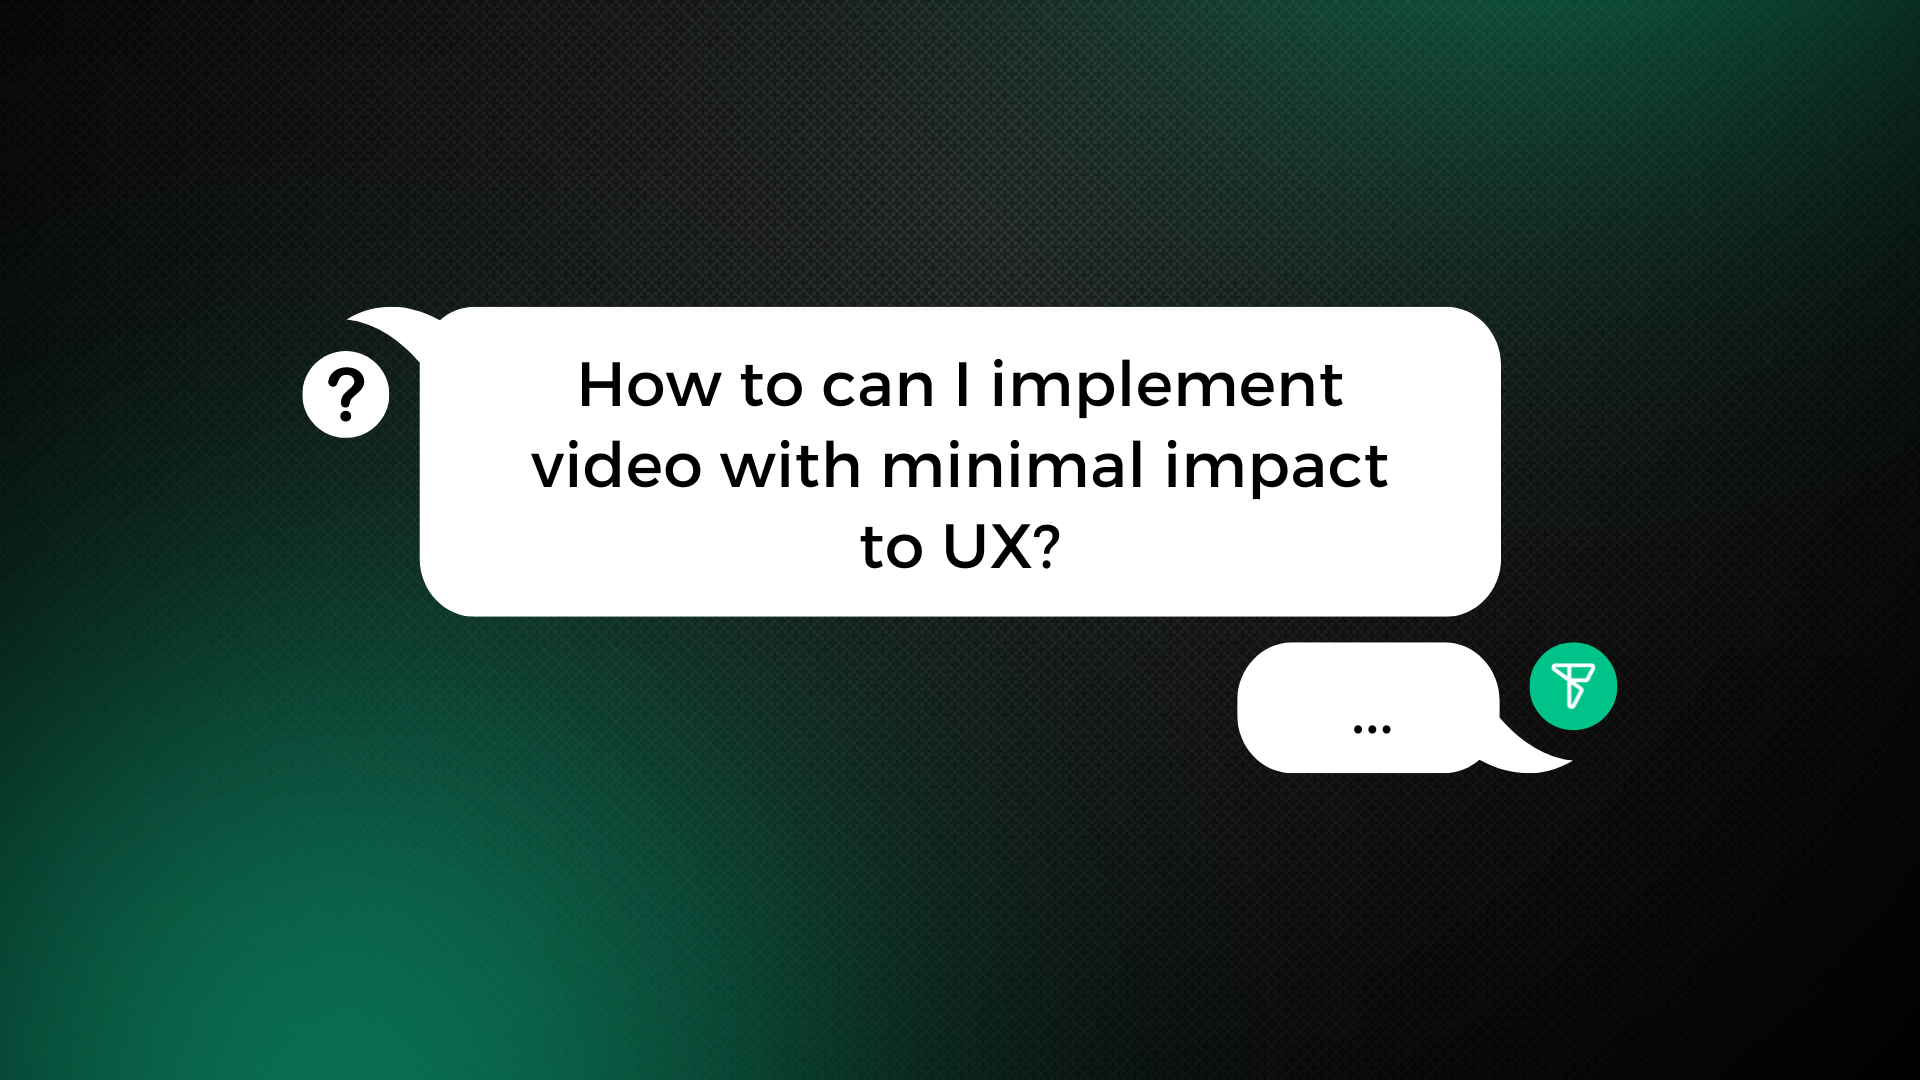 FAQ: How to can I implement video with minimal impact to UX?